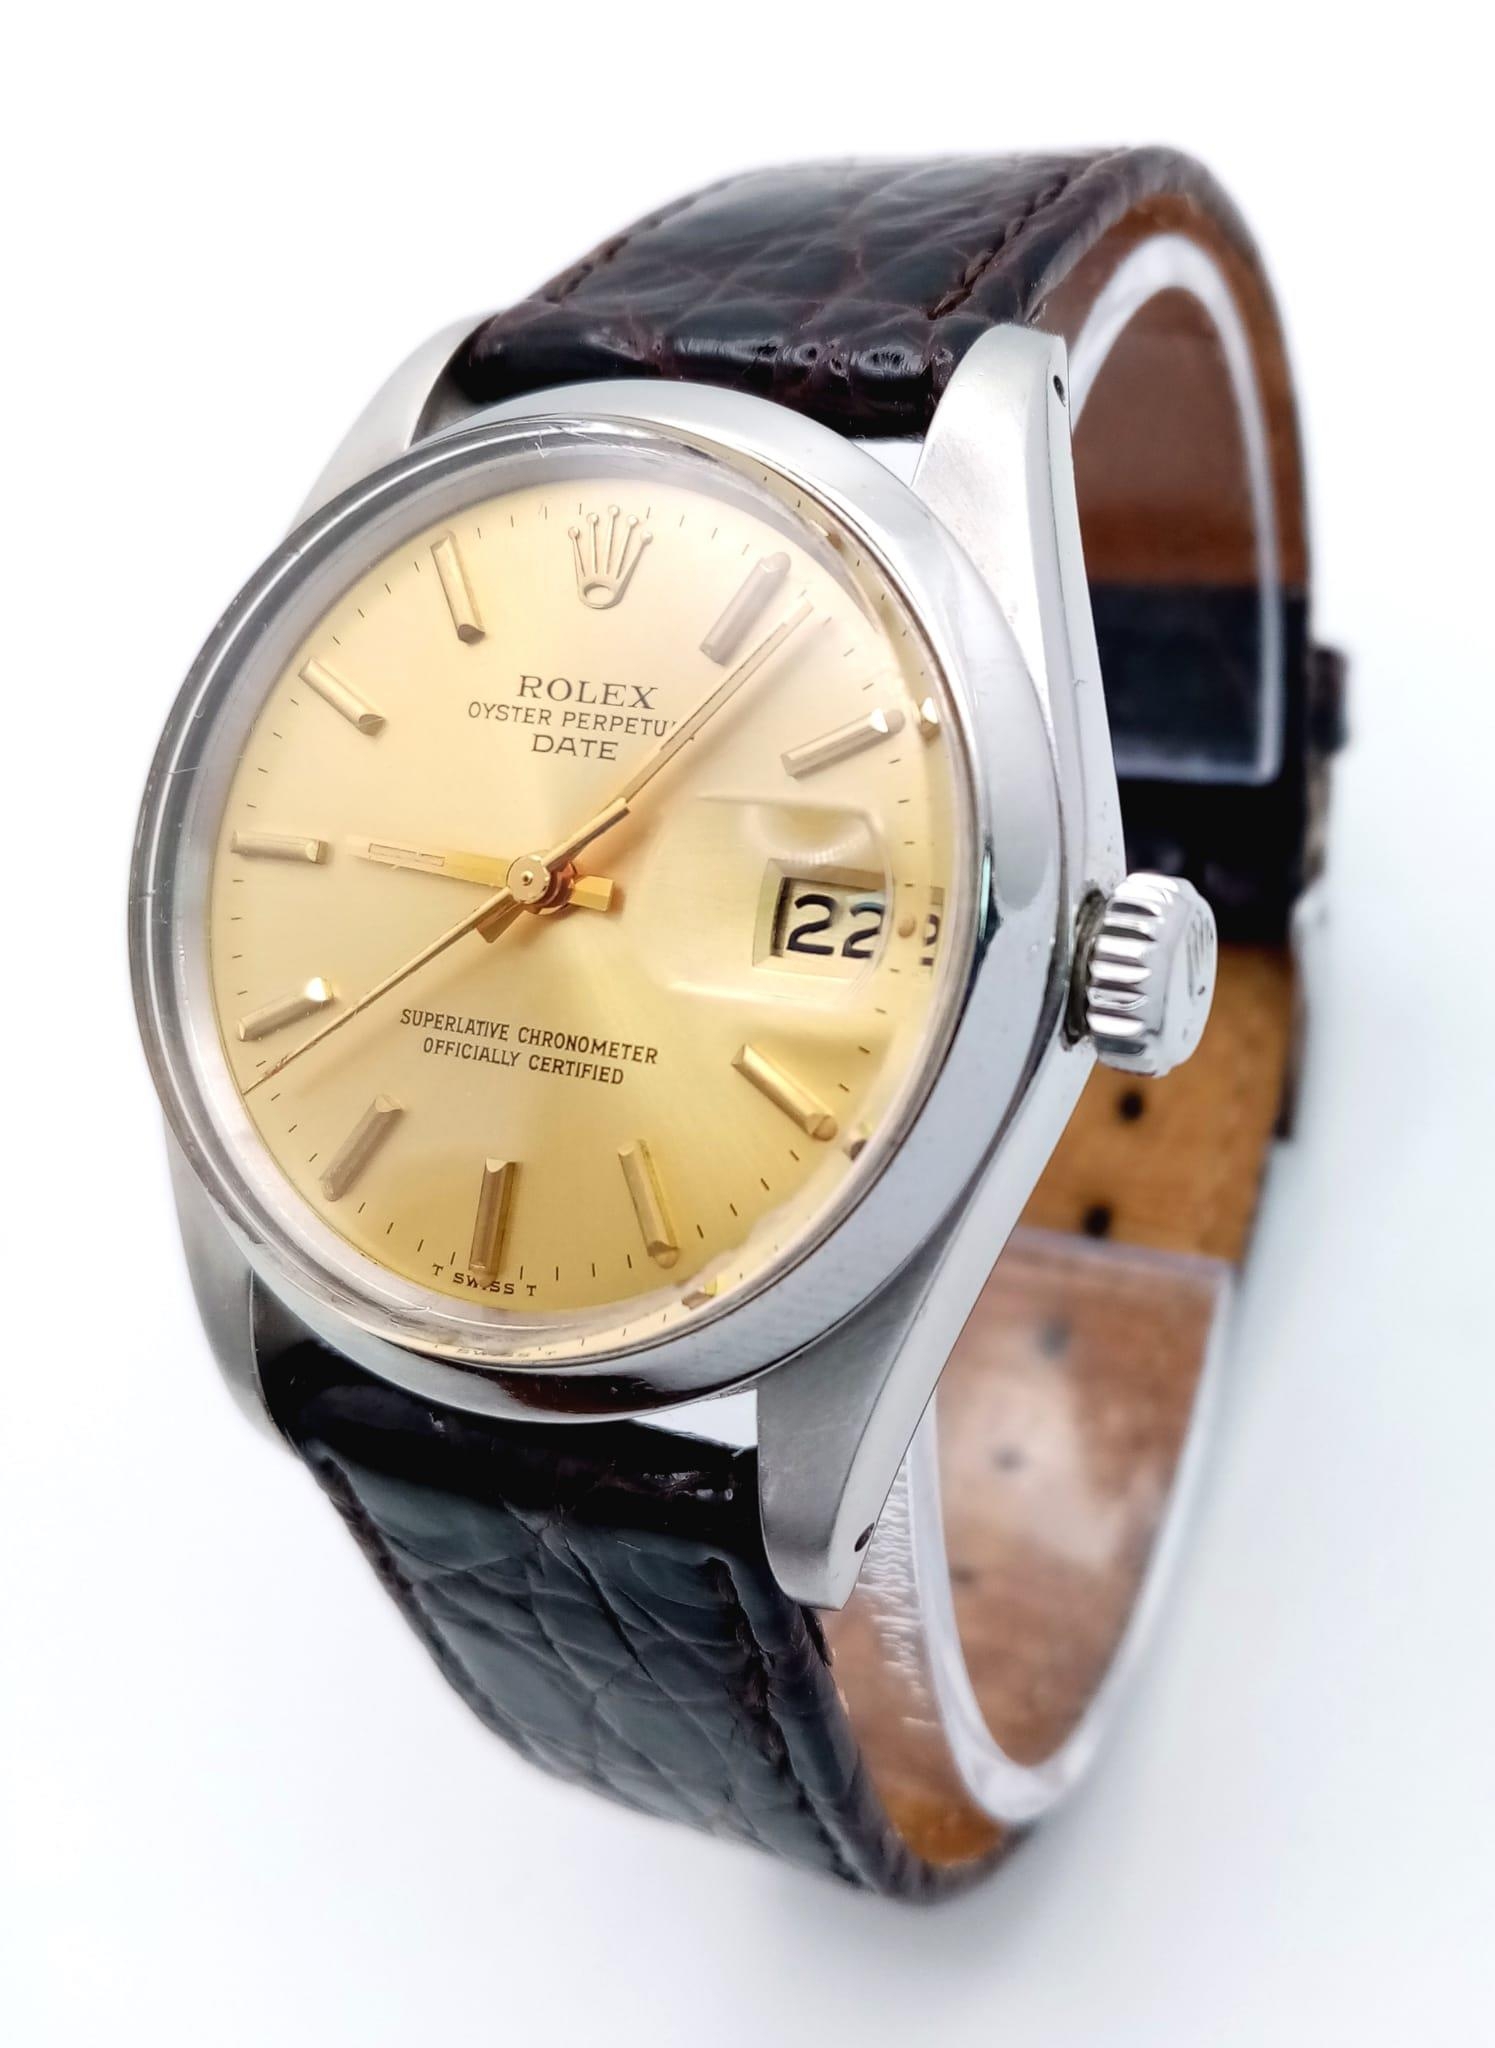 A Rolex Model 1500 Oyster Perpetual Date Automatic Gents Watch. Brown leather strap. stainless steel